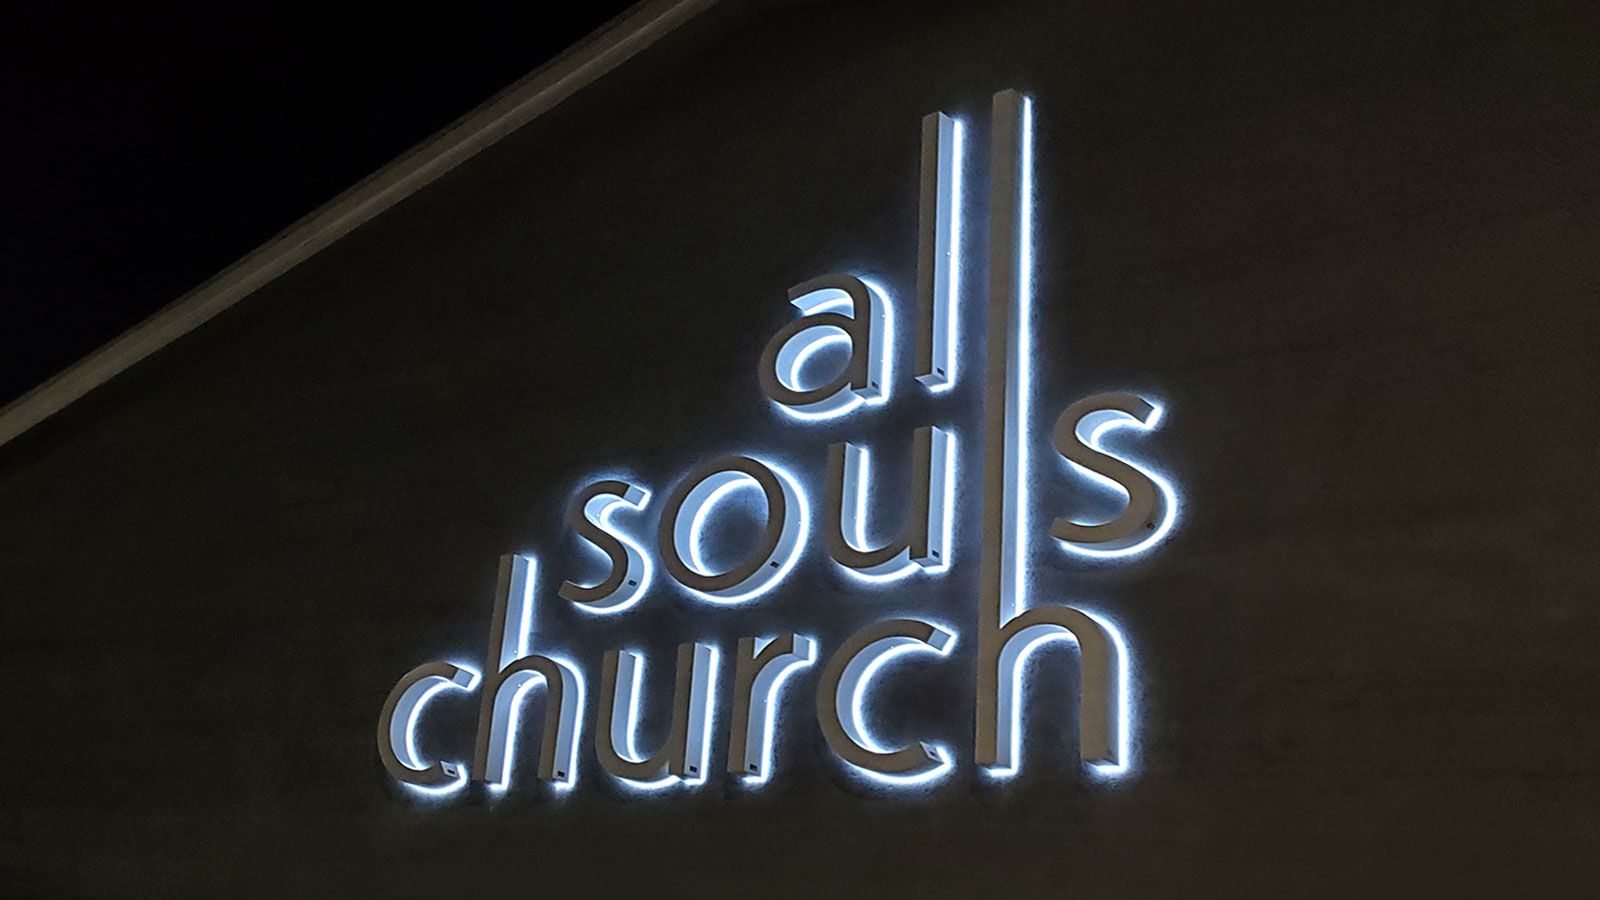 all souls church building sign